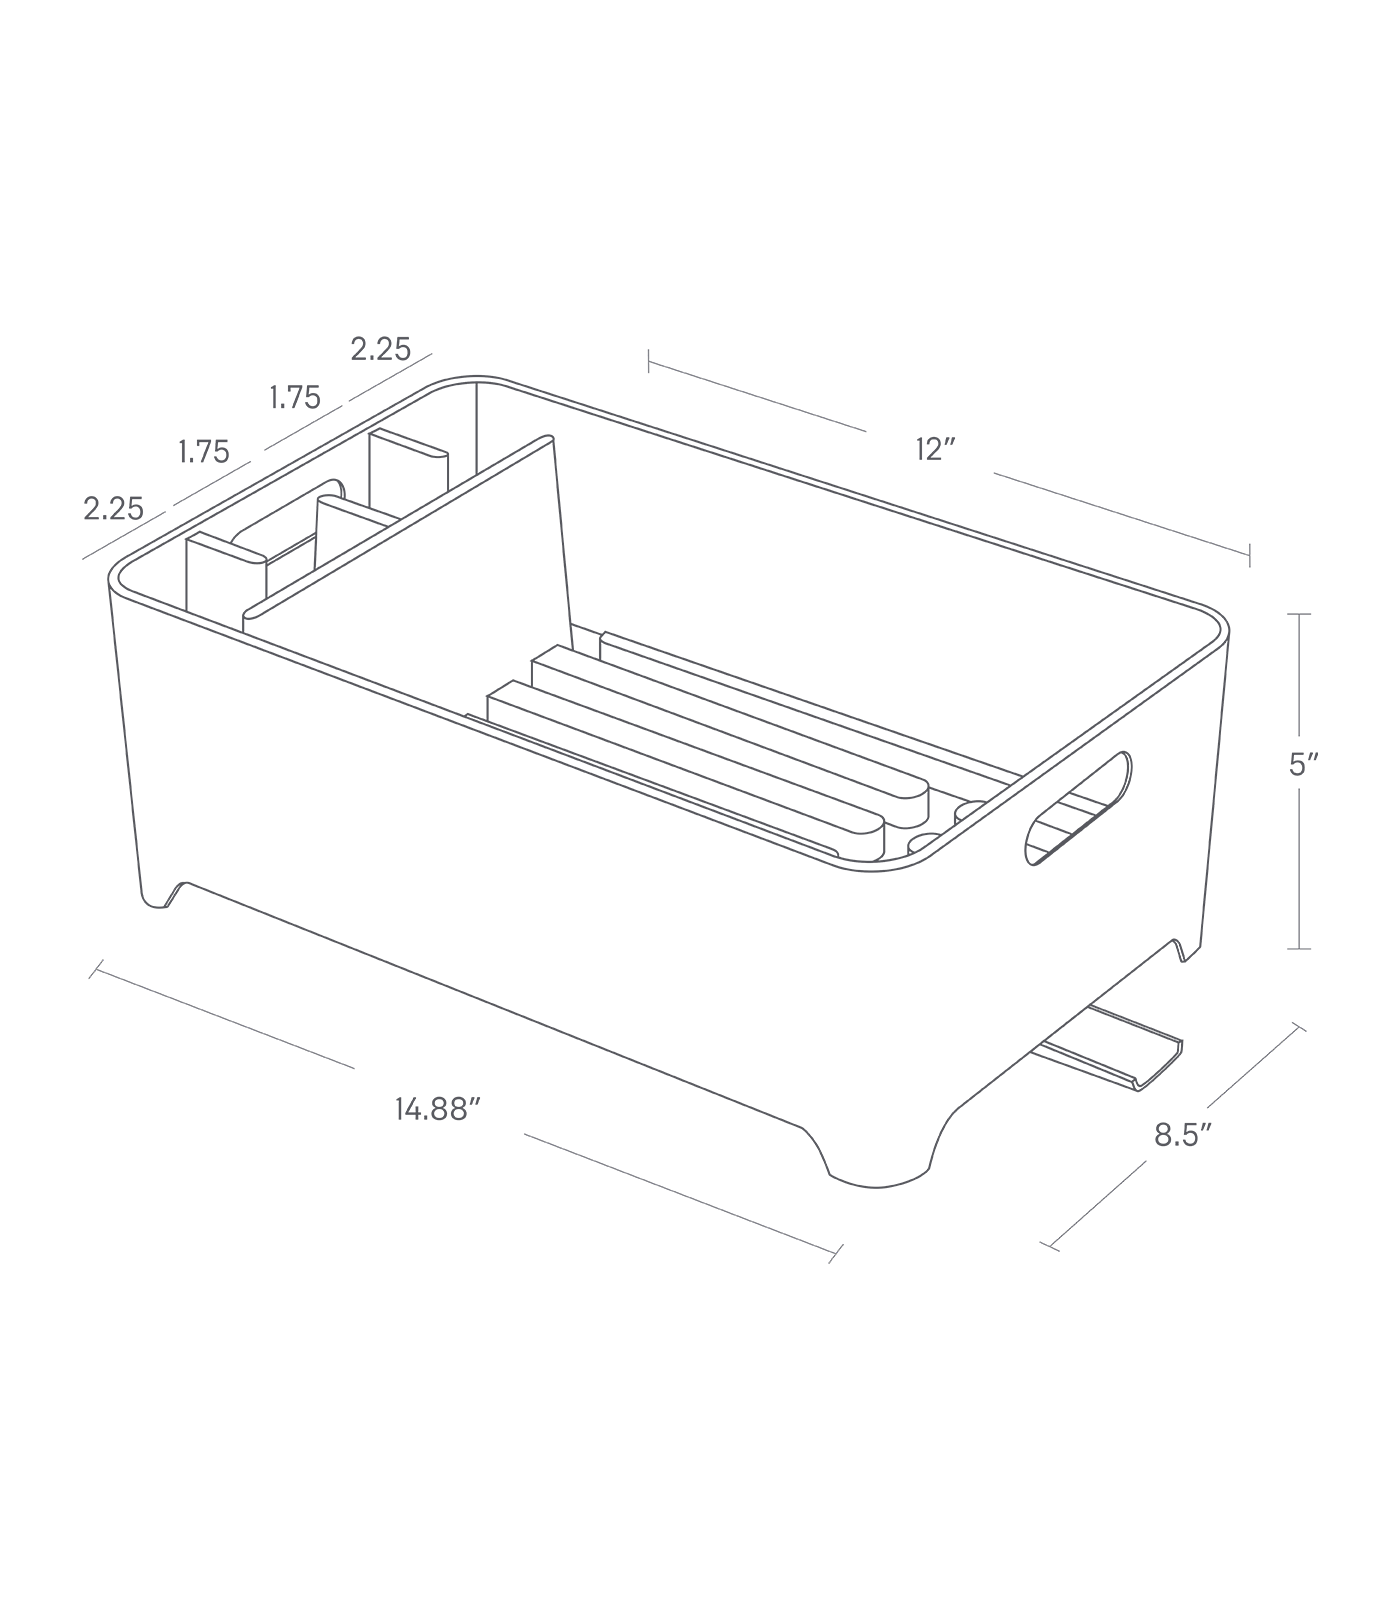 Dimension image for Dish Rack showing a total height of 5